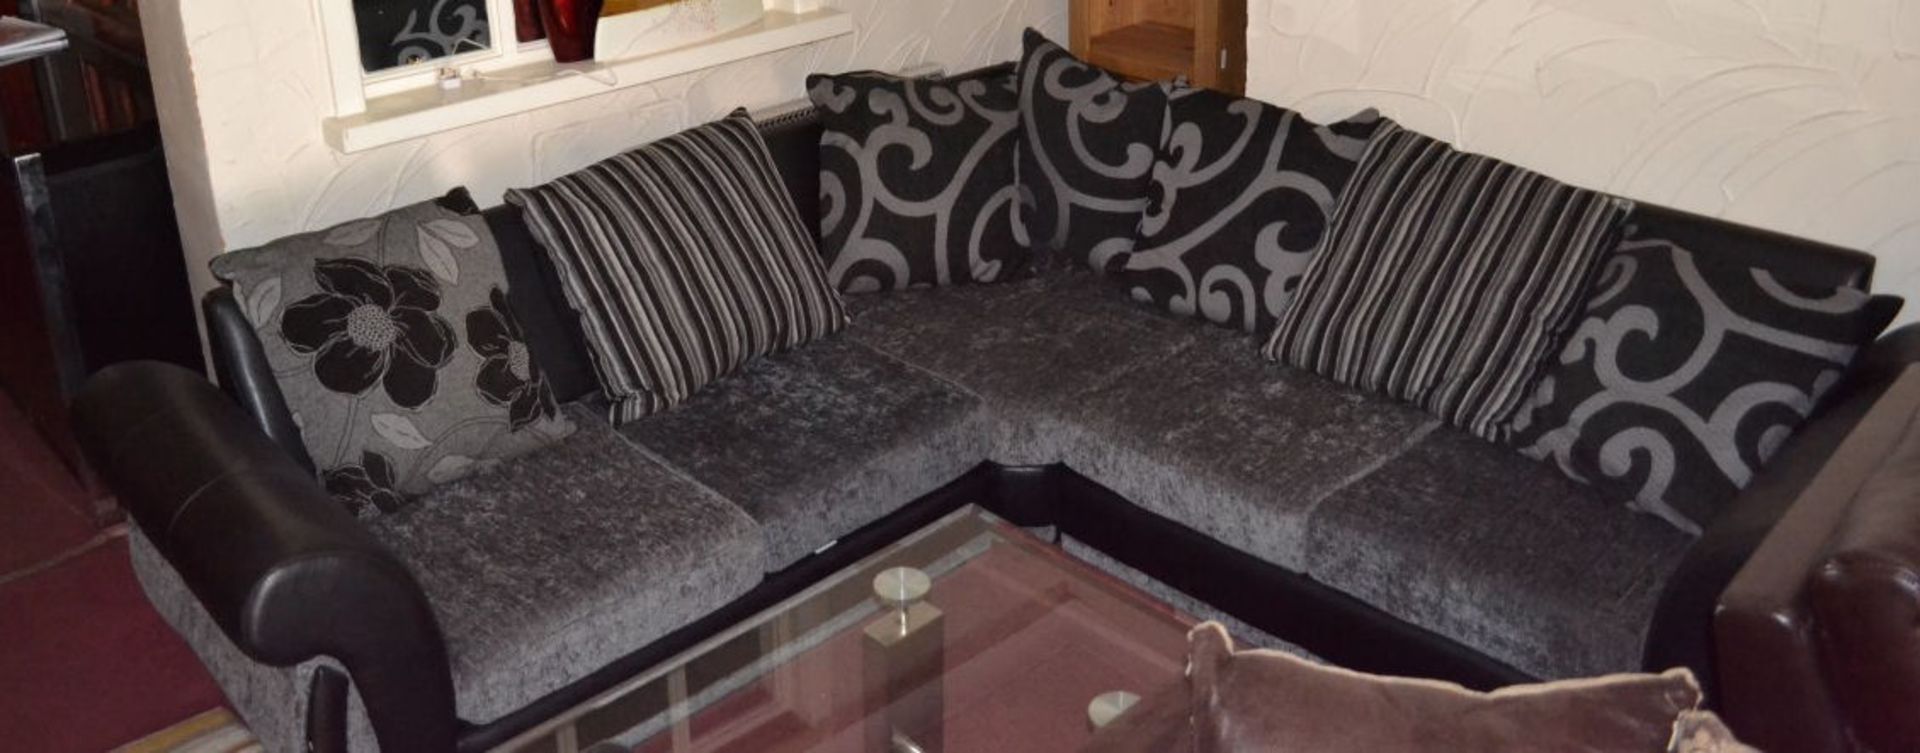 1 x Large Contemporary Leather & Fabric Corner Sofa In Grey & Black - Image 4 of 4